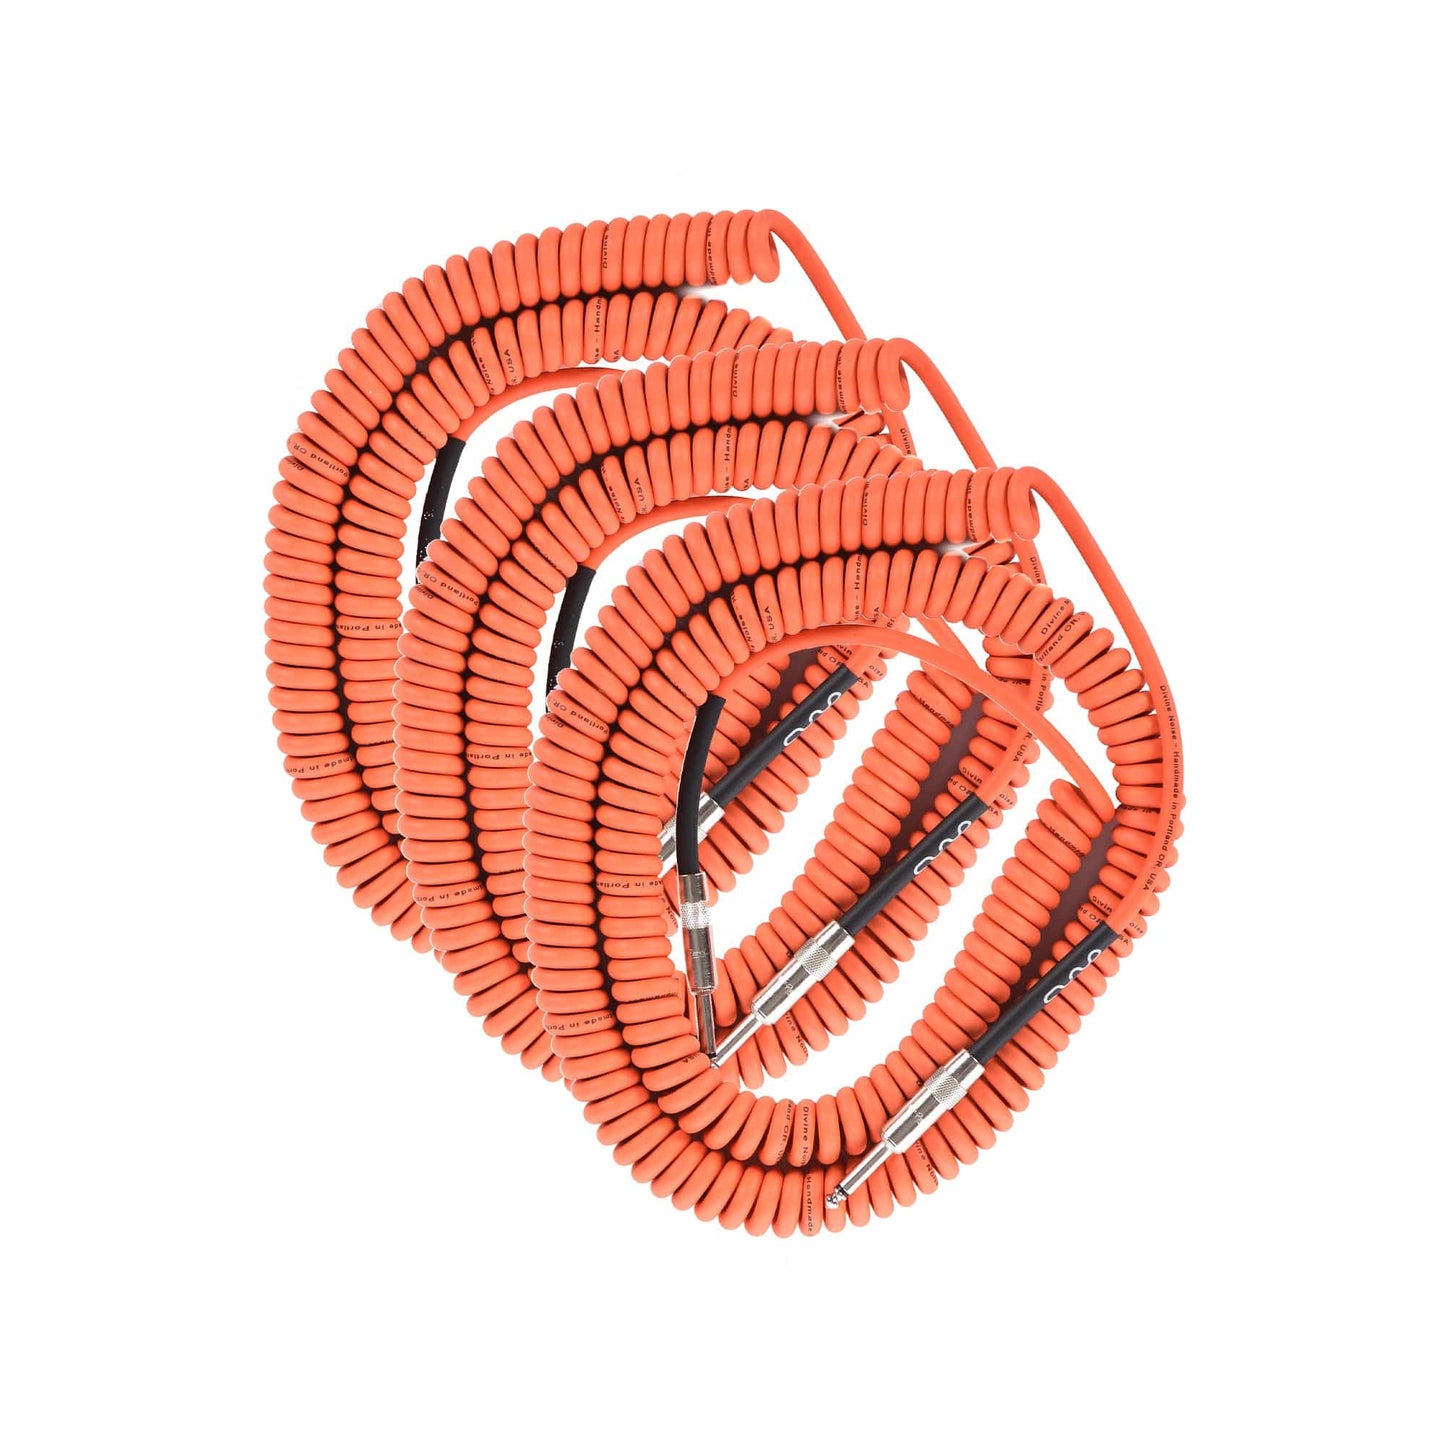 Divine Noise Curly Cable Orange 30' Straight/Straight 3 Pack Bundle Accessories / Cables